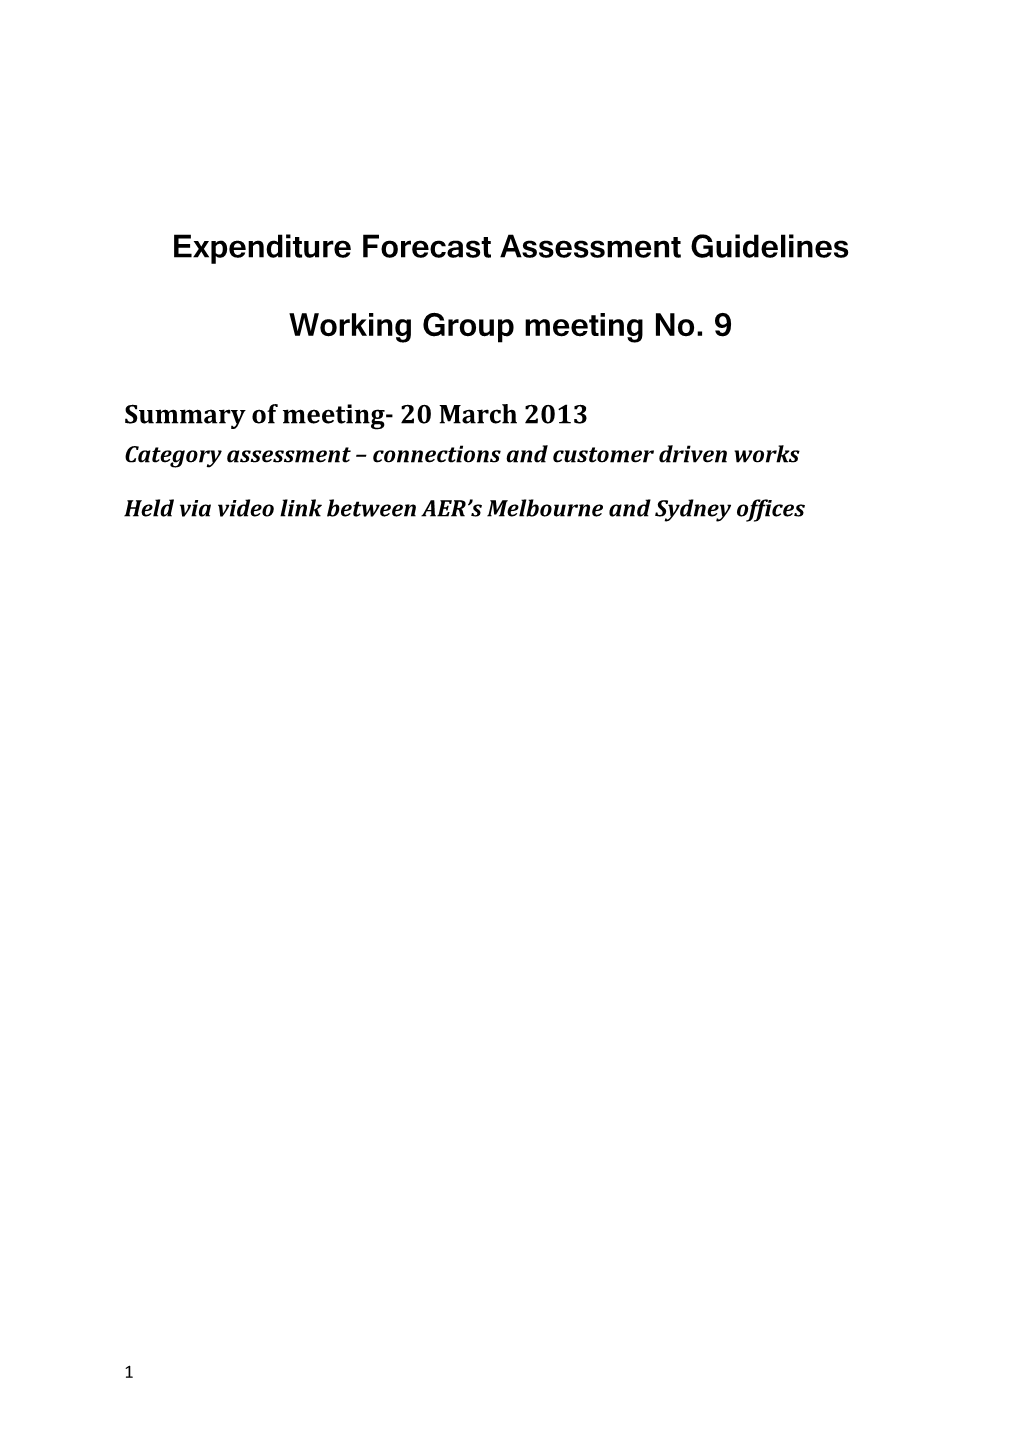 Expenditure Forecast Assessment Guideline - Stakeholder Roundtable Minutes - 12 February 2013